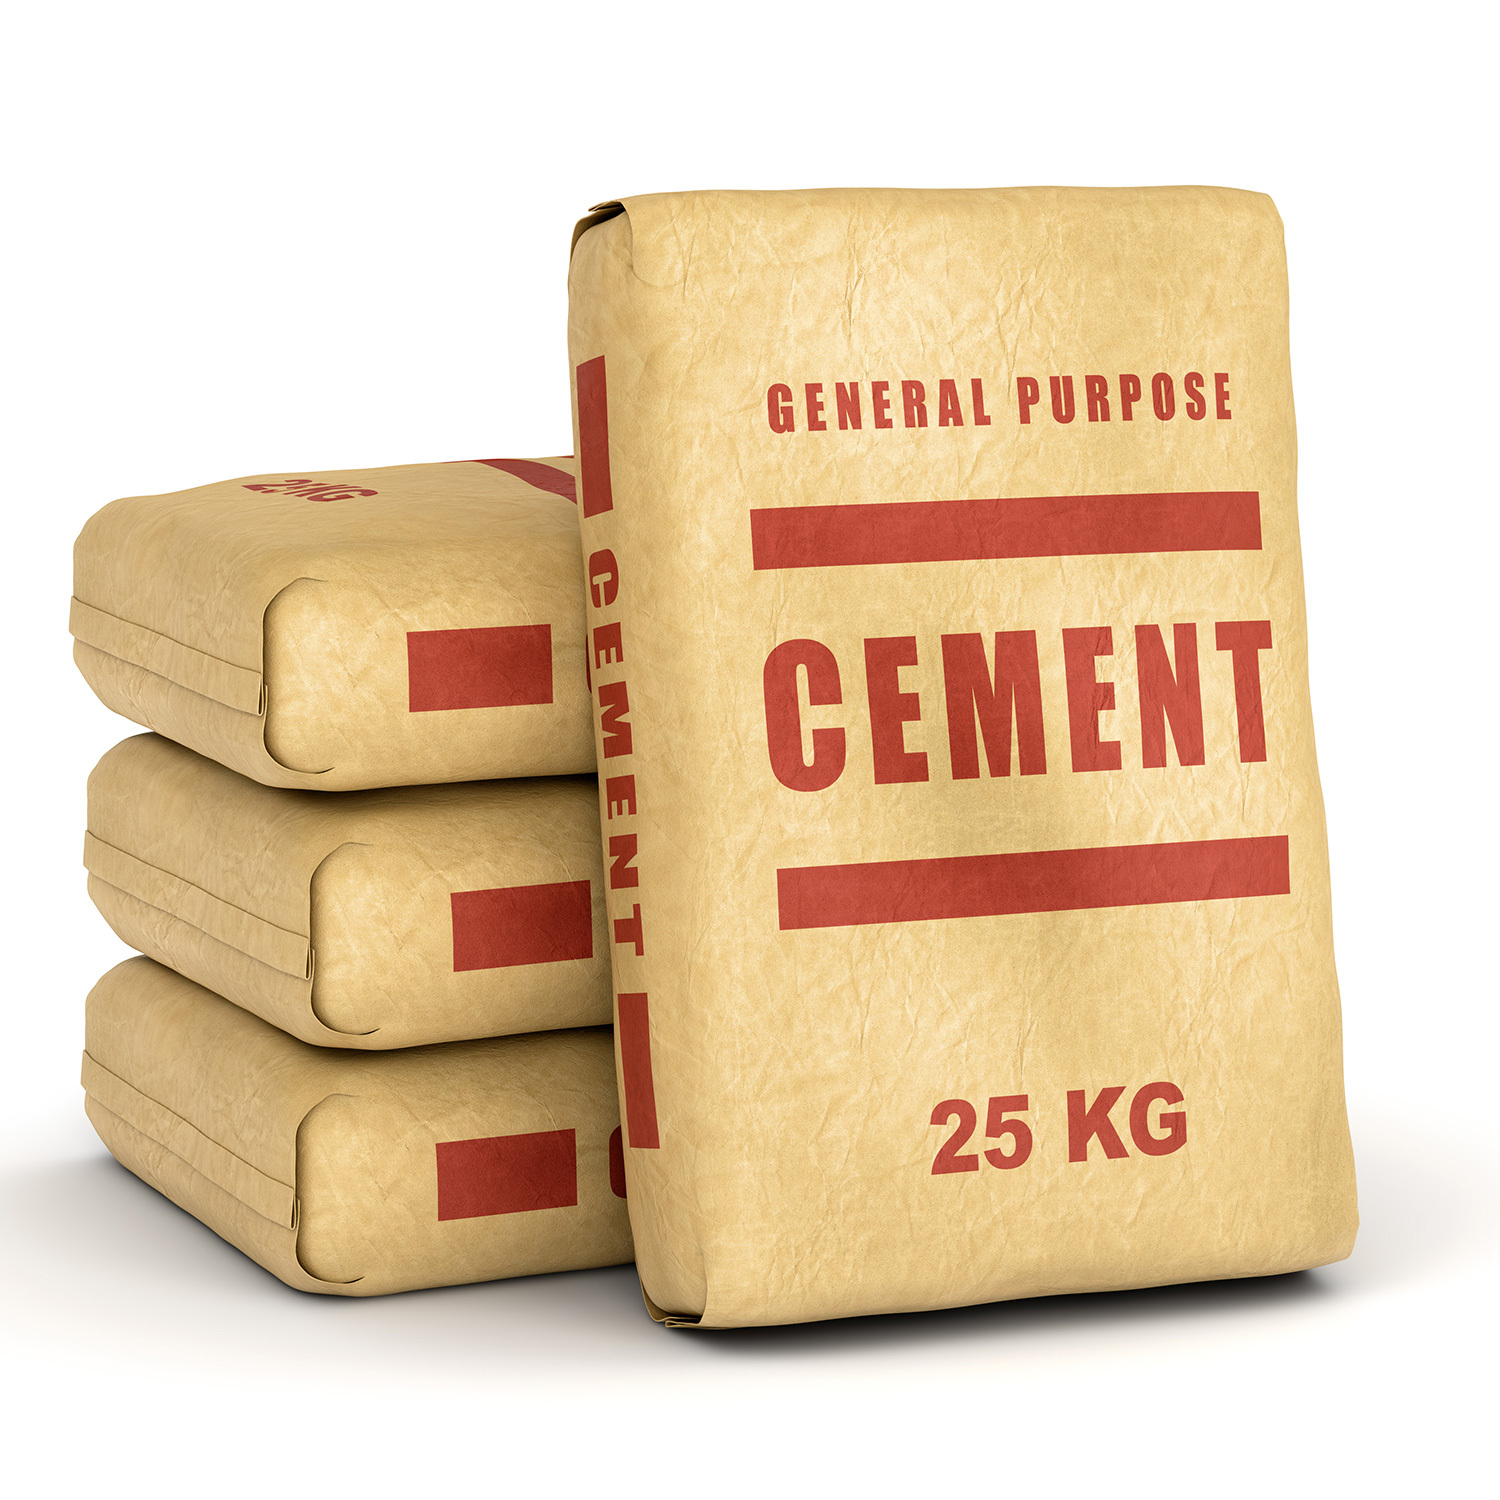 <span style="font-weight: bold;">comparing cement by manufacturers</span><br>